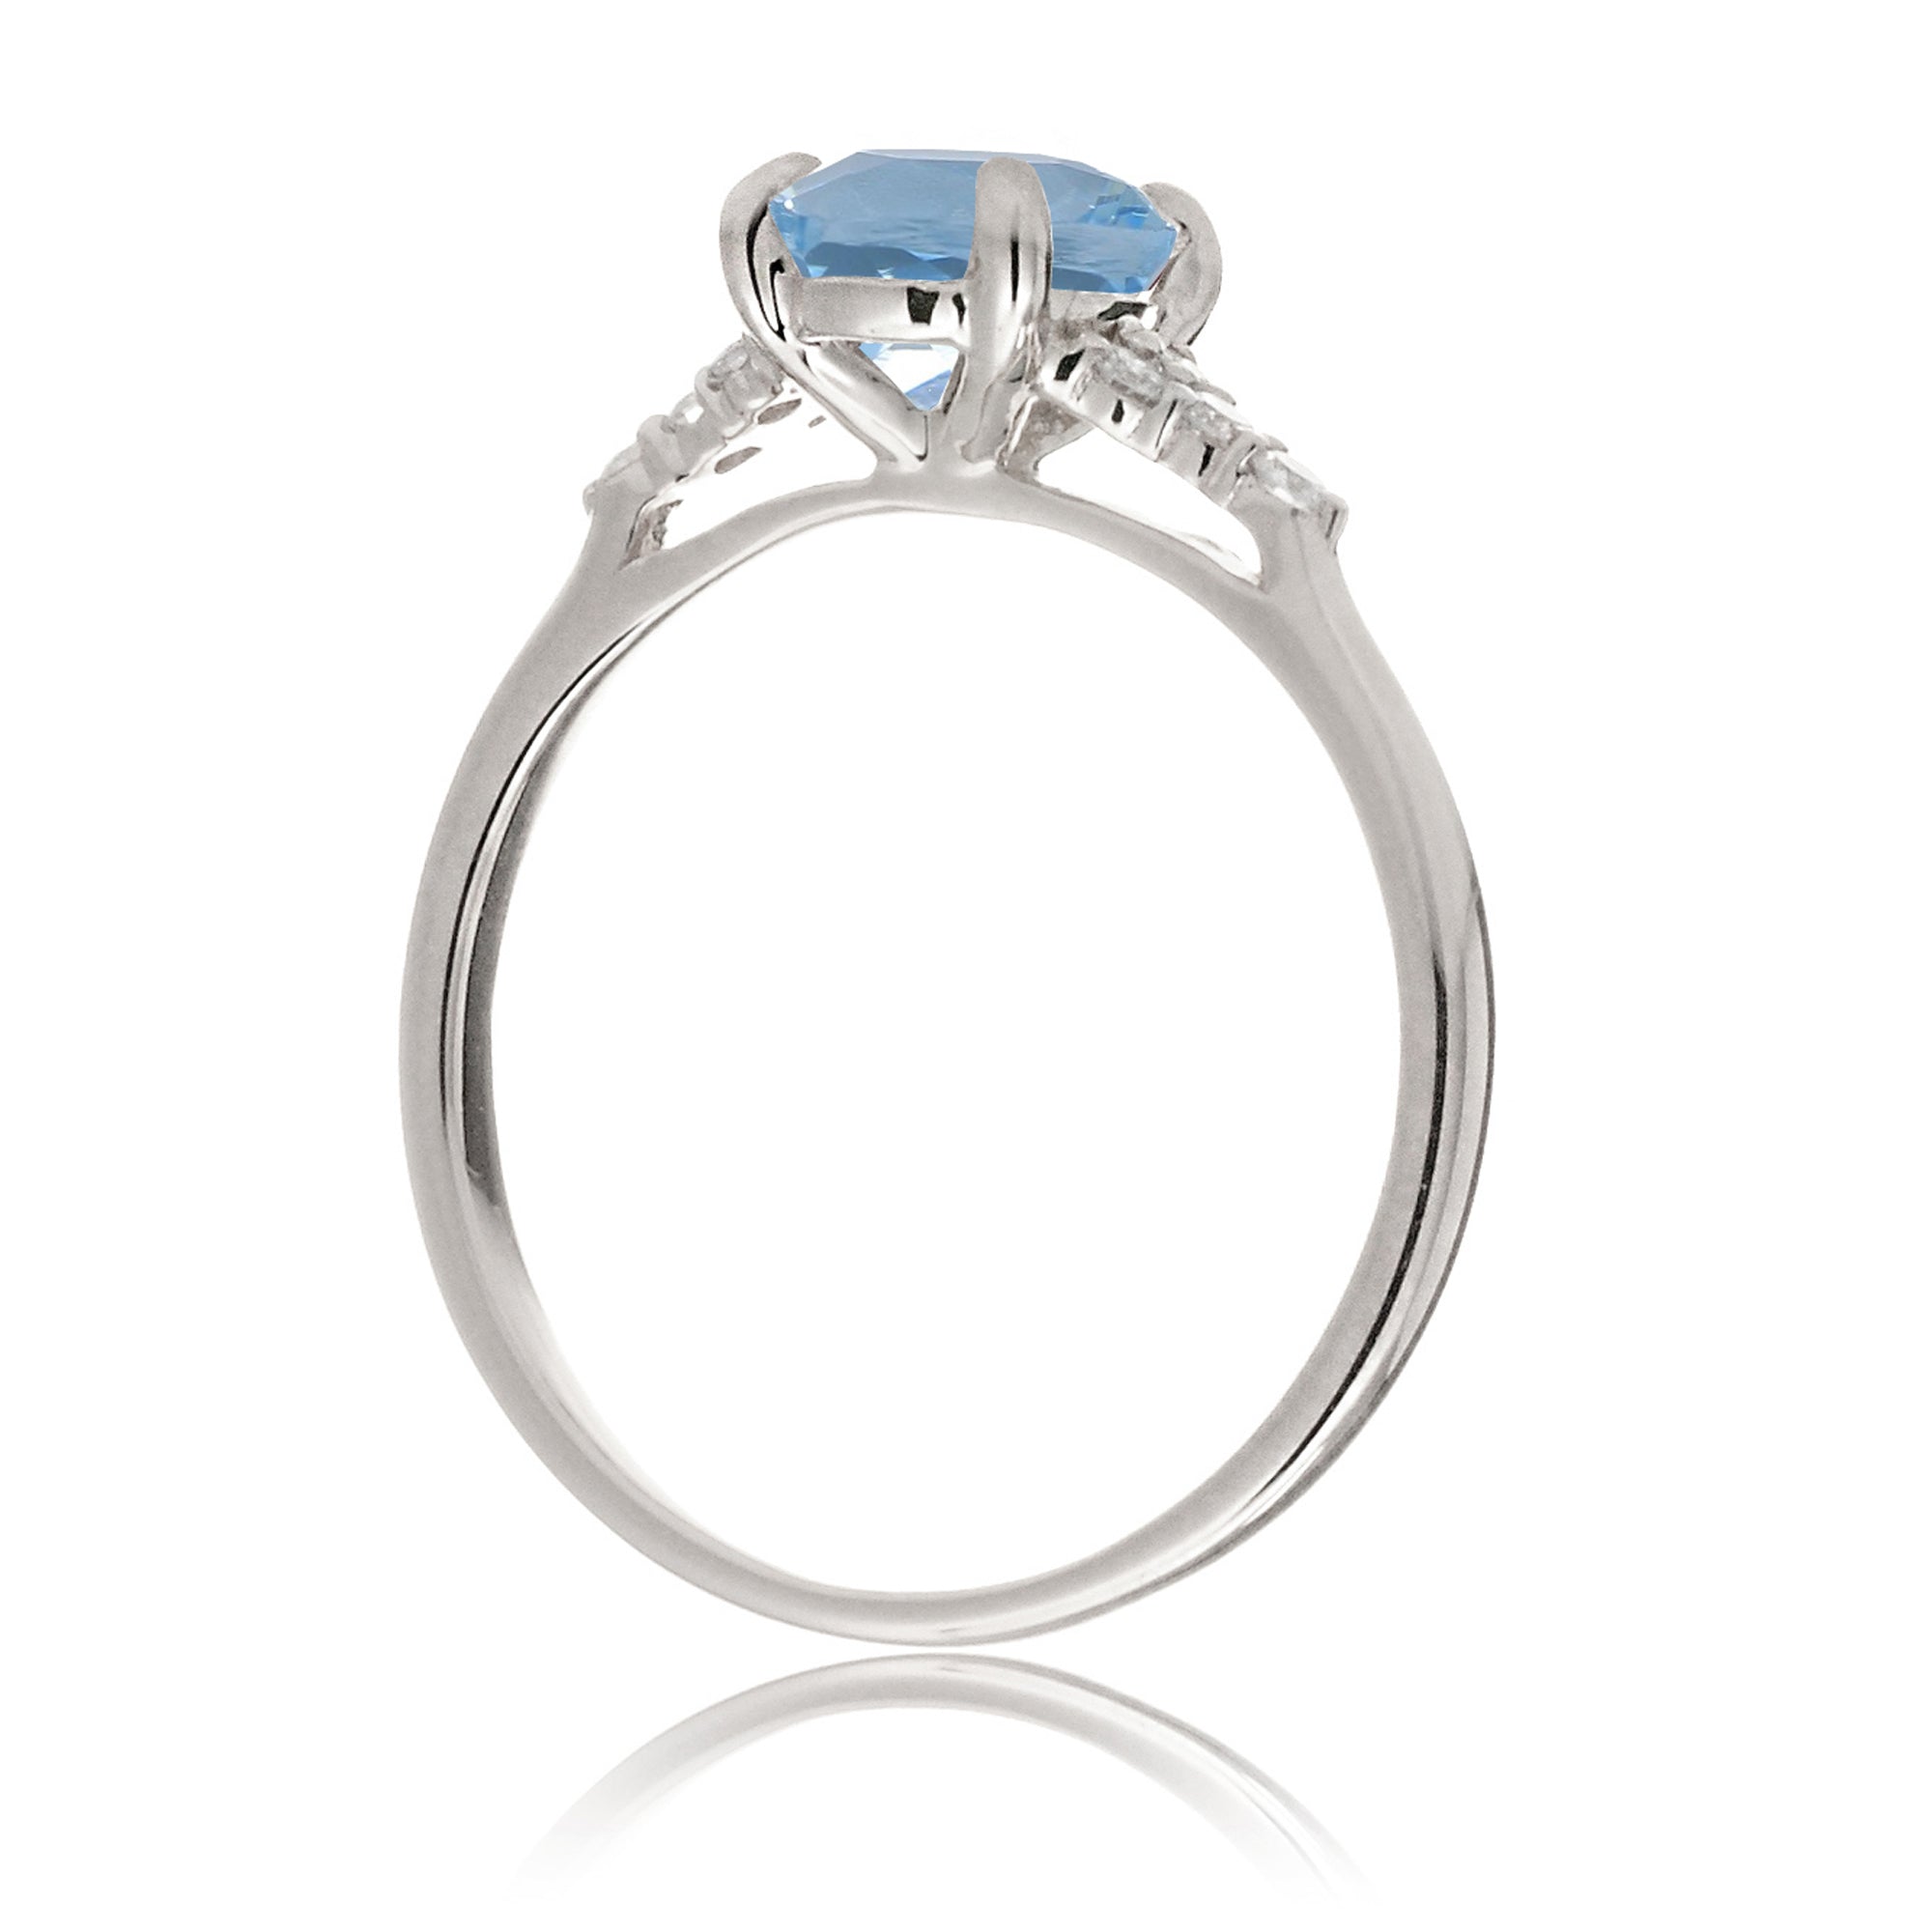 Aquamarine engagement ring cushion cut and solid band in white gold